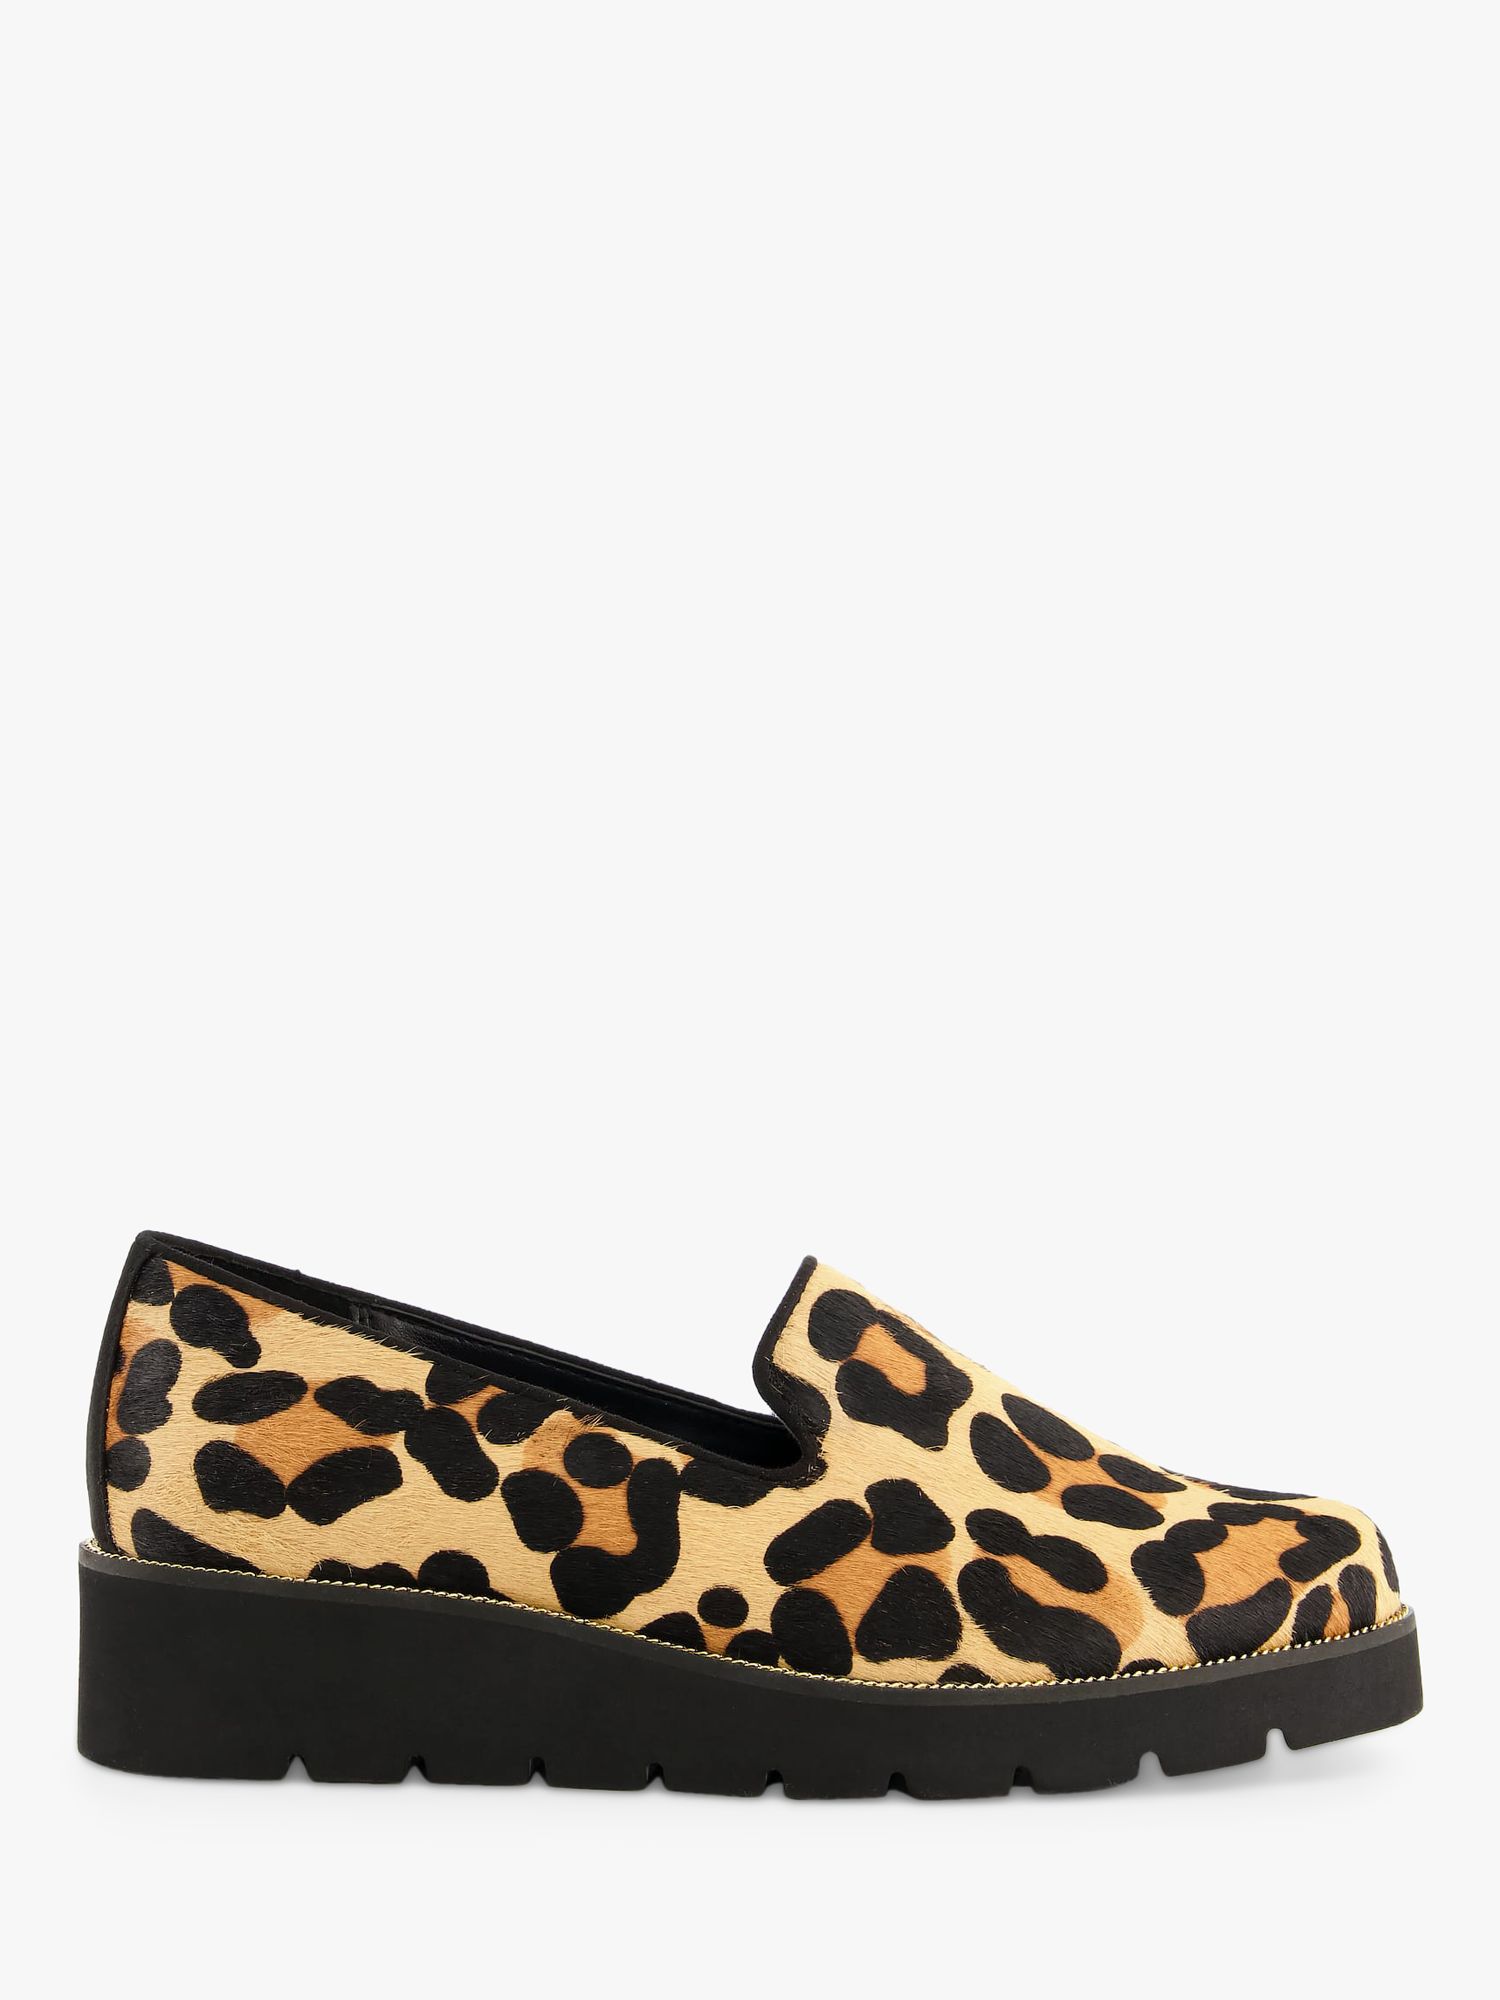 Dune Glides Leather Leopard Loafers, Multi, 3